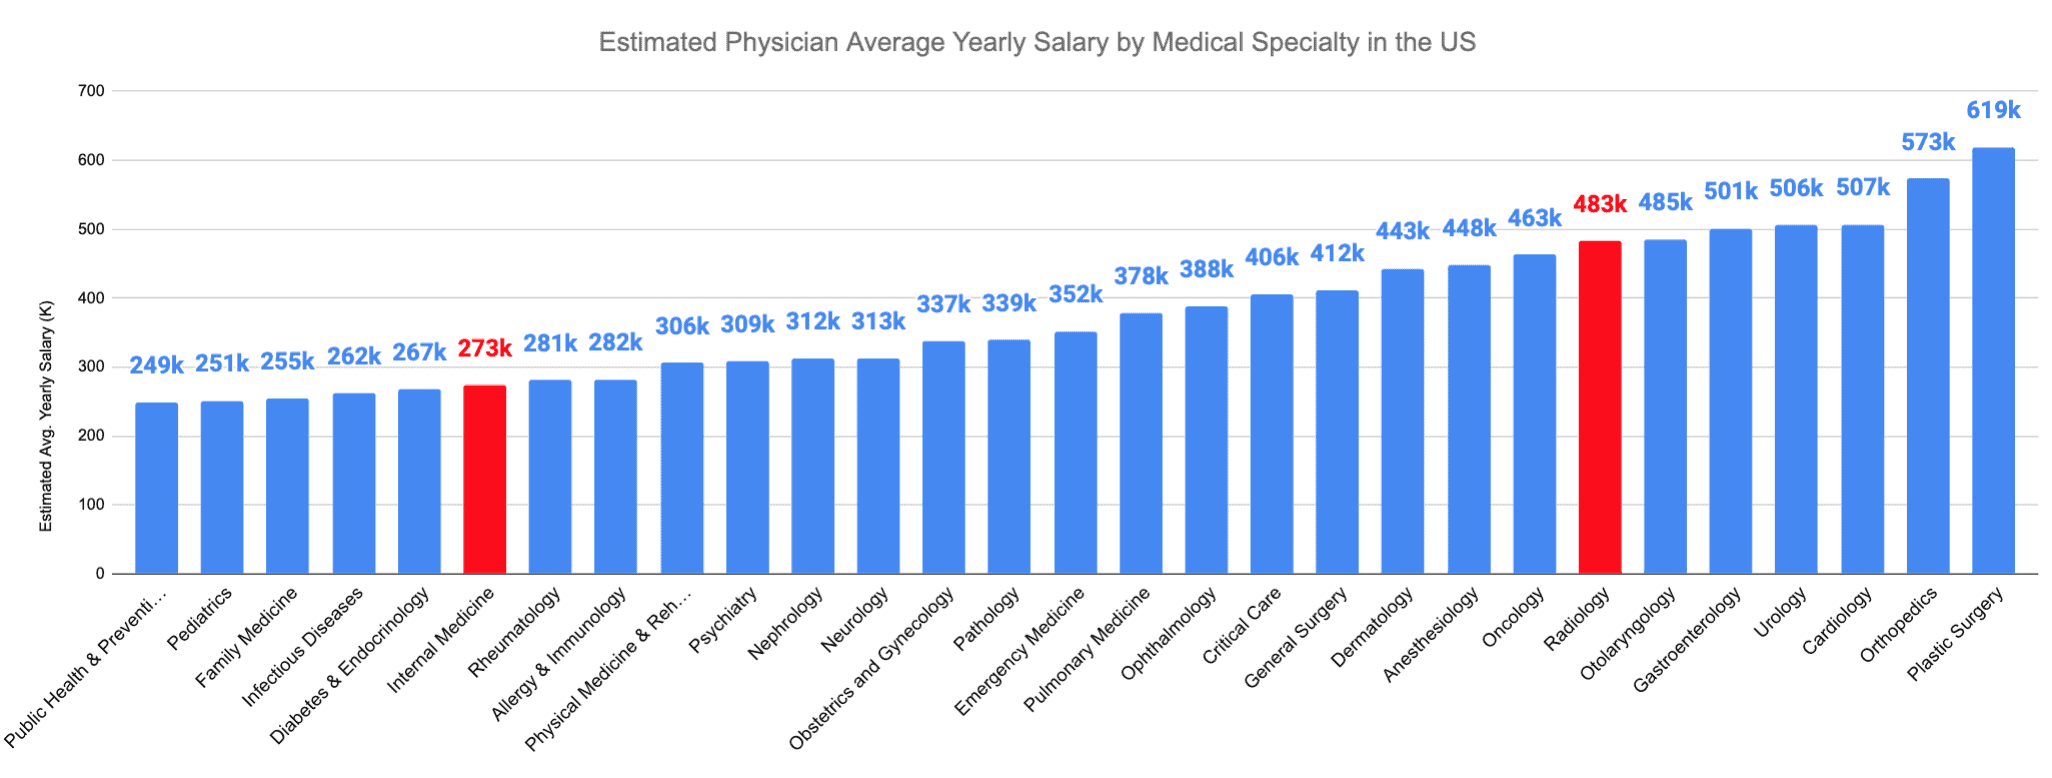 Radiology vs. Internal Medicine Estimated Physician Average Yearly Salary by Medical Specialty in the US